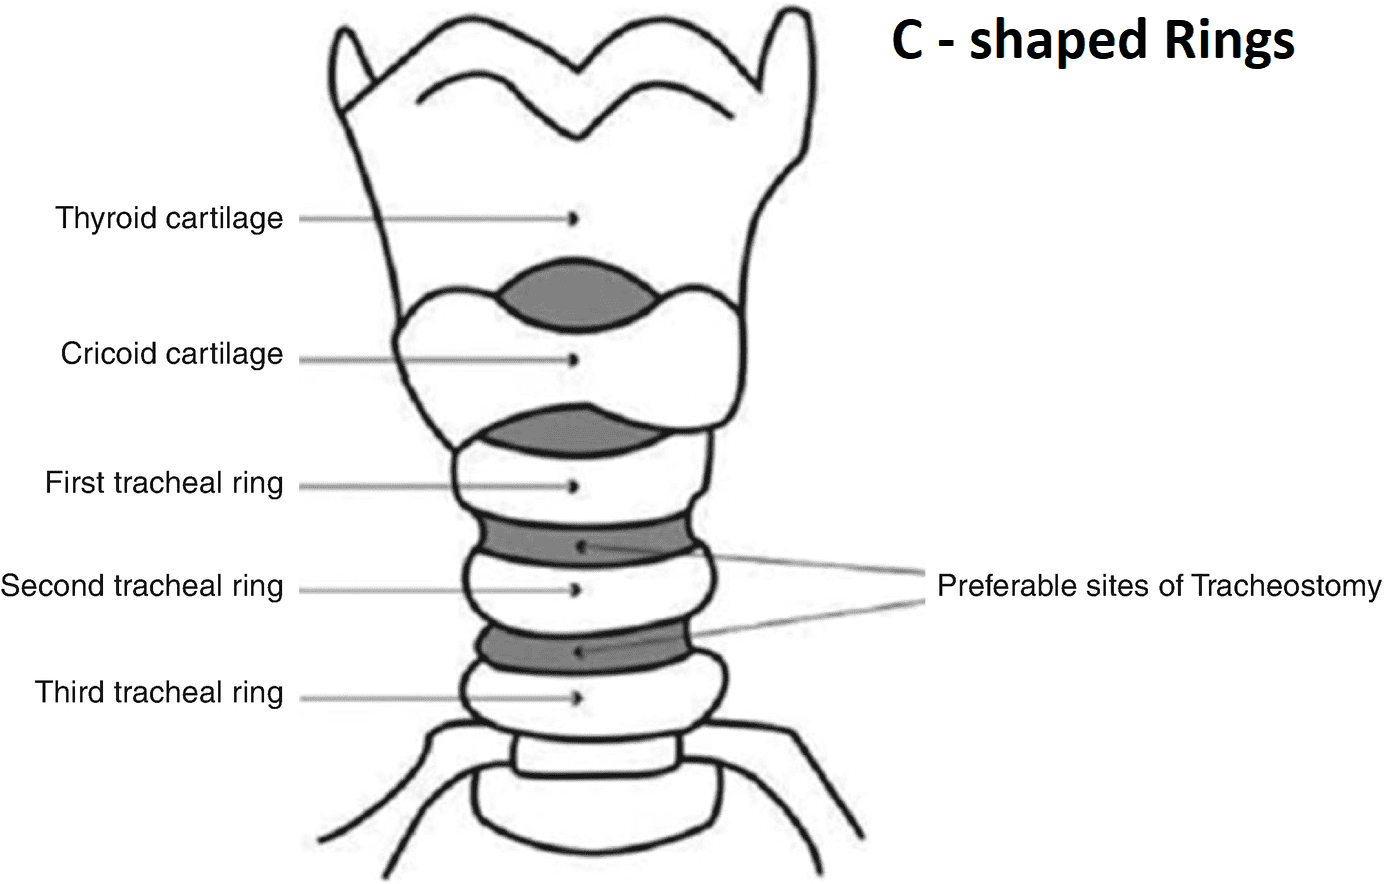 Why are the cartilage rings in the trachea c-shaped?